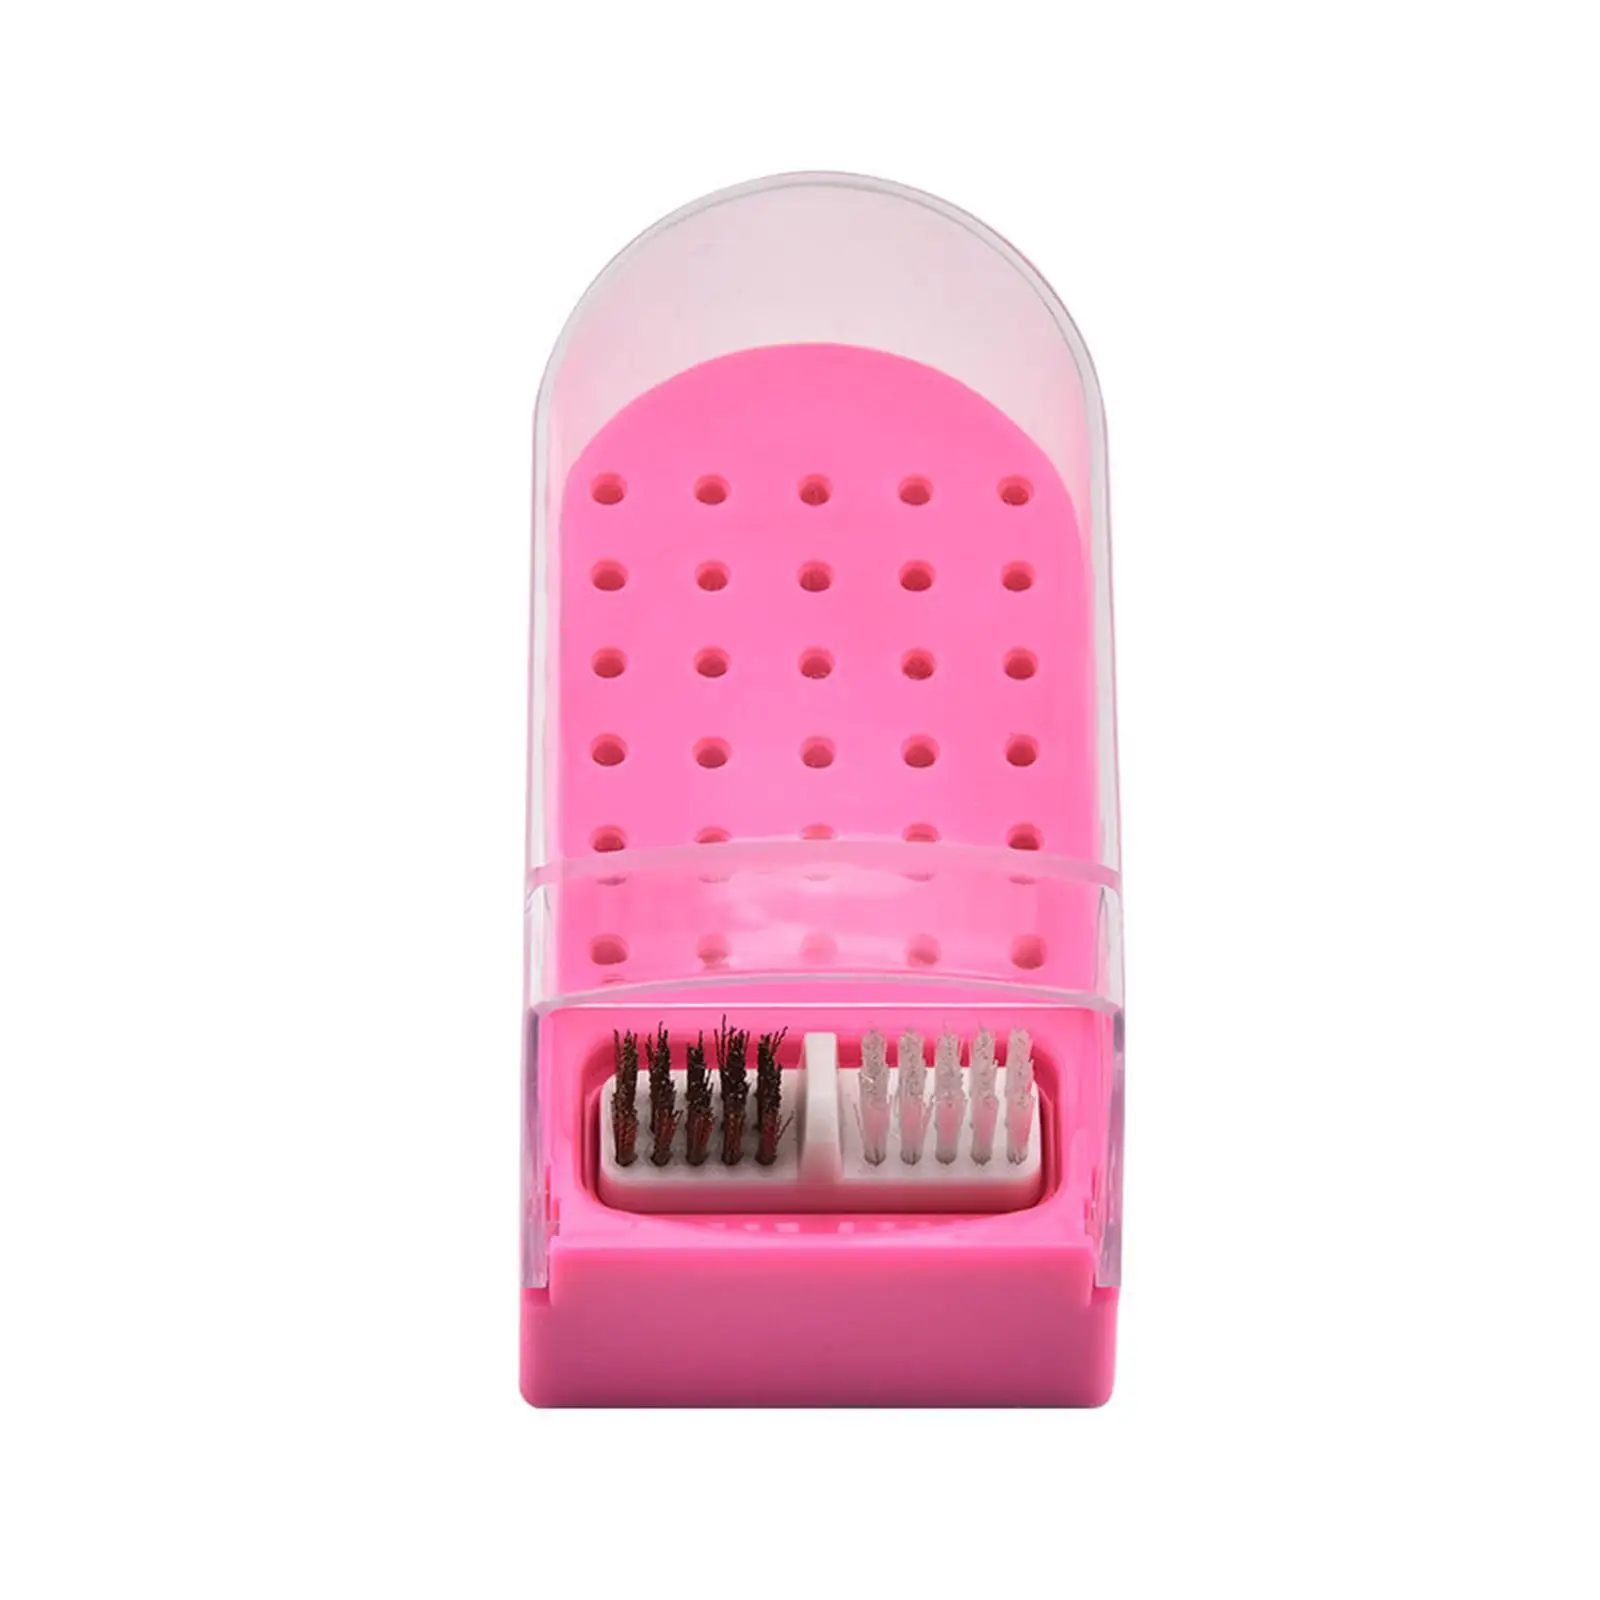 Nail Drill Bit Holder with Clear Lid Display Stand Grinding Case Nail Salon Waterproof 30 Holes Stand Case Manicure Accessories